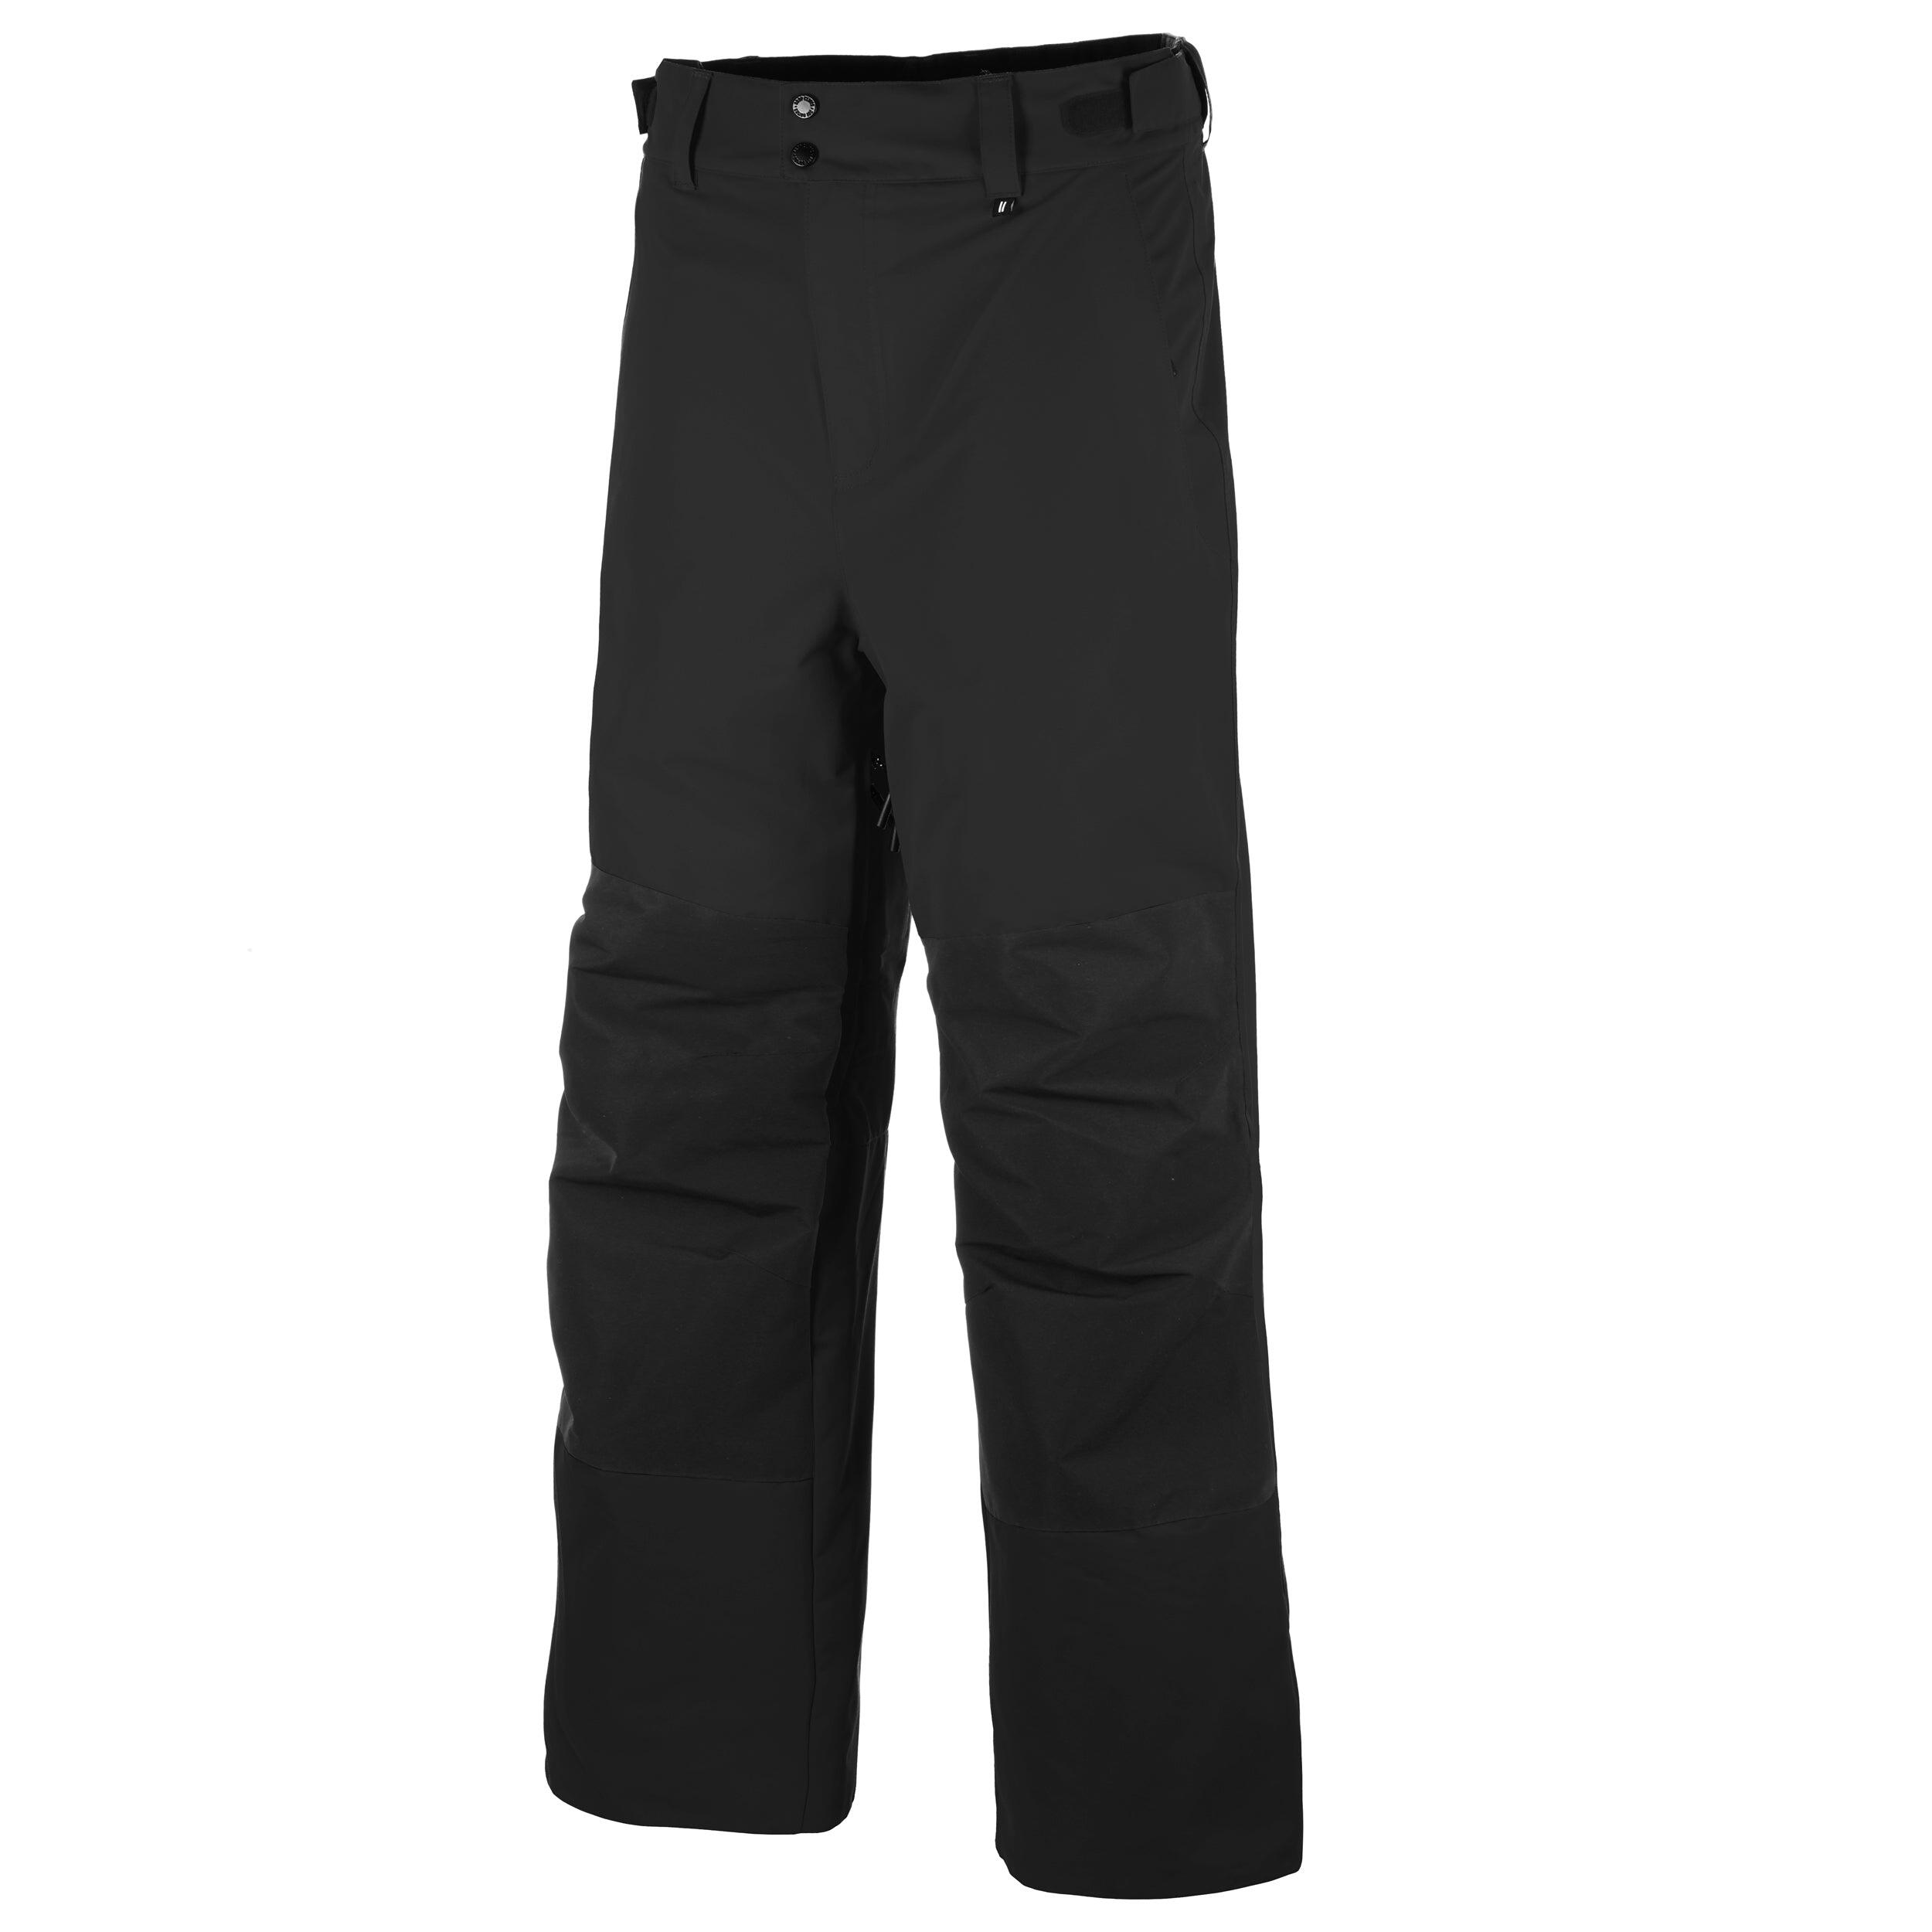 Planks Easy Rider Men's Ski Pants in Black with Pockets - Breathable Trousers 5/6